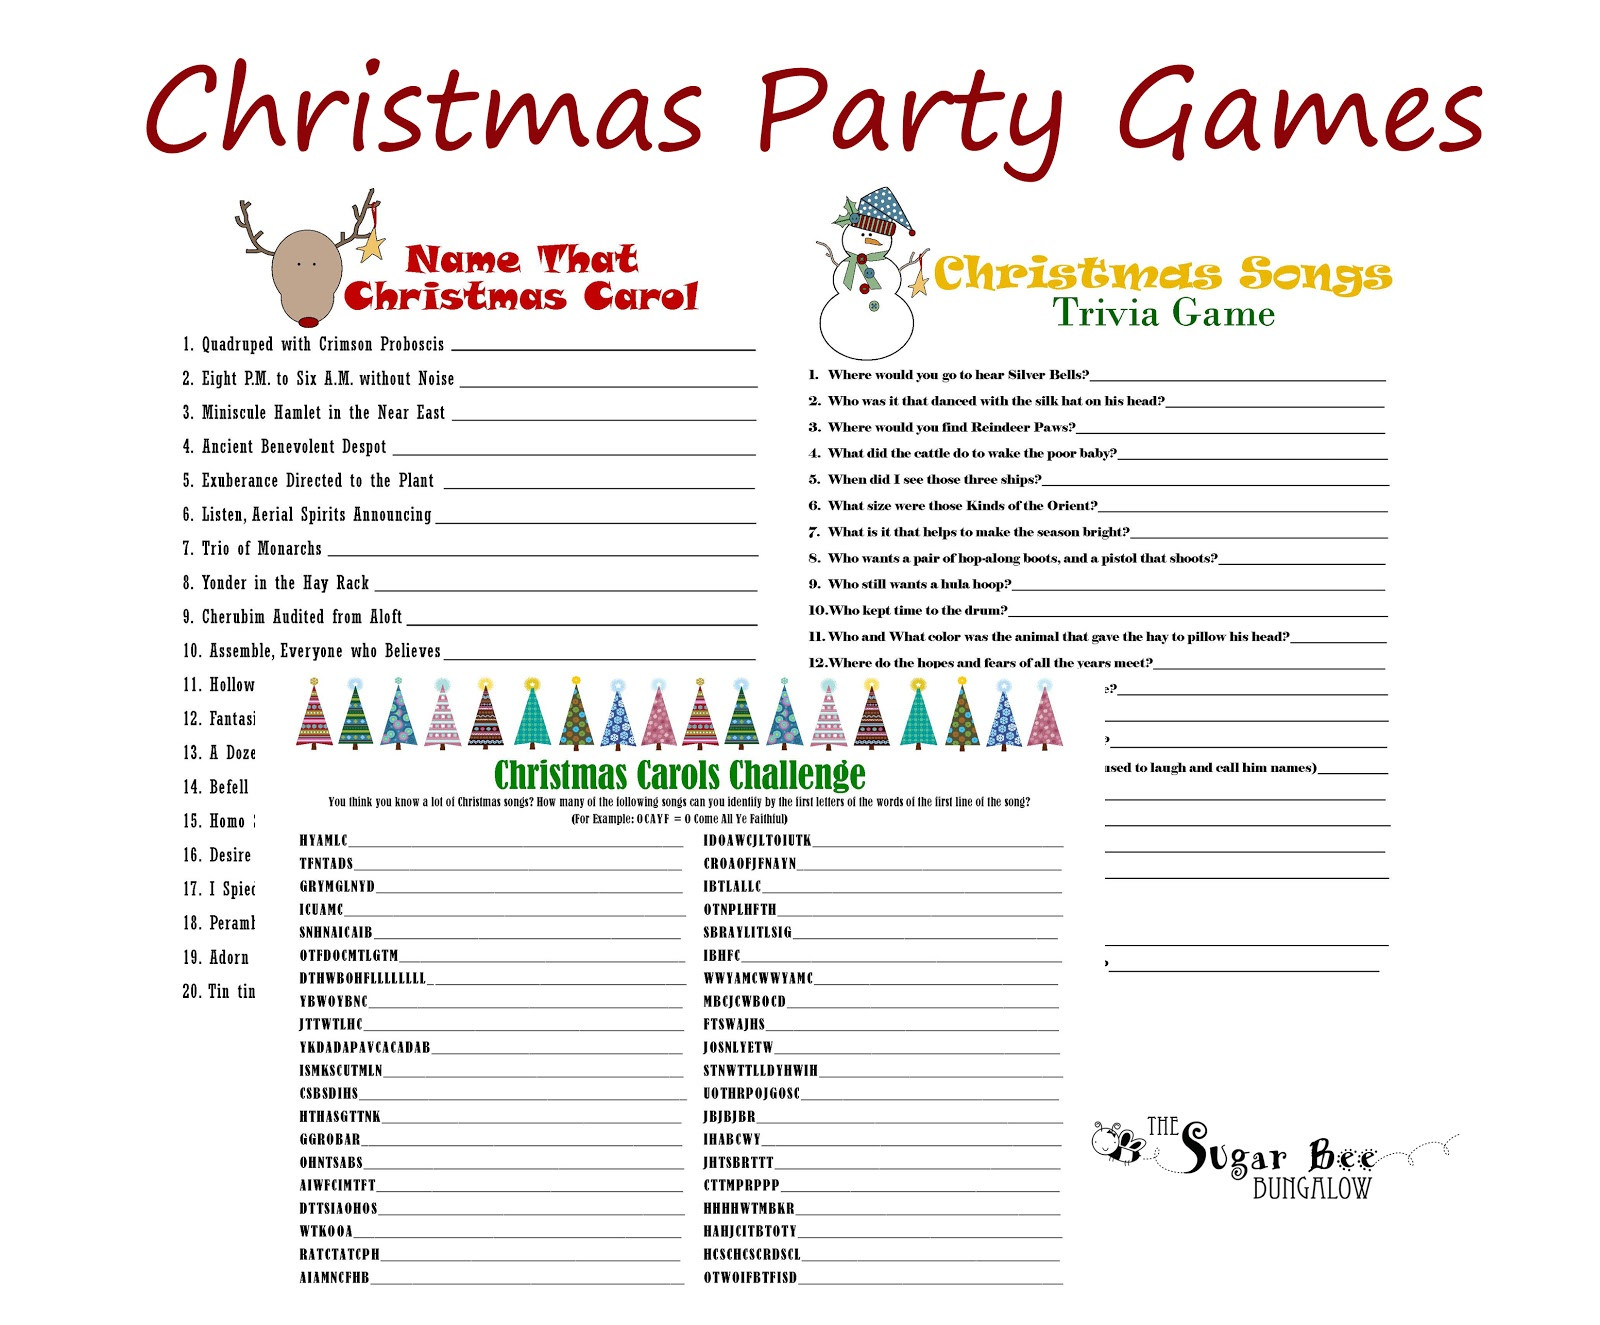 Holiday Party Game Ideas For Work
 The Sugar Bee Bungalow December 2012